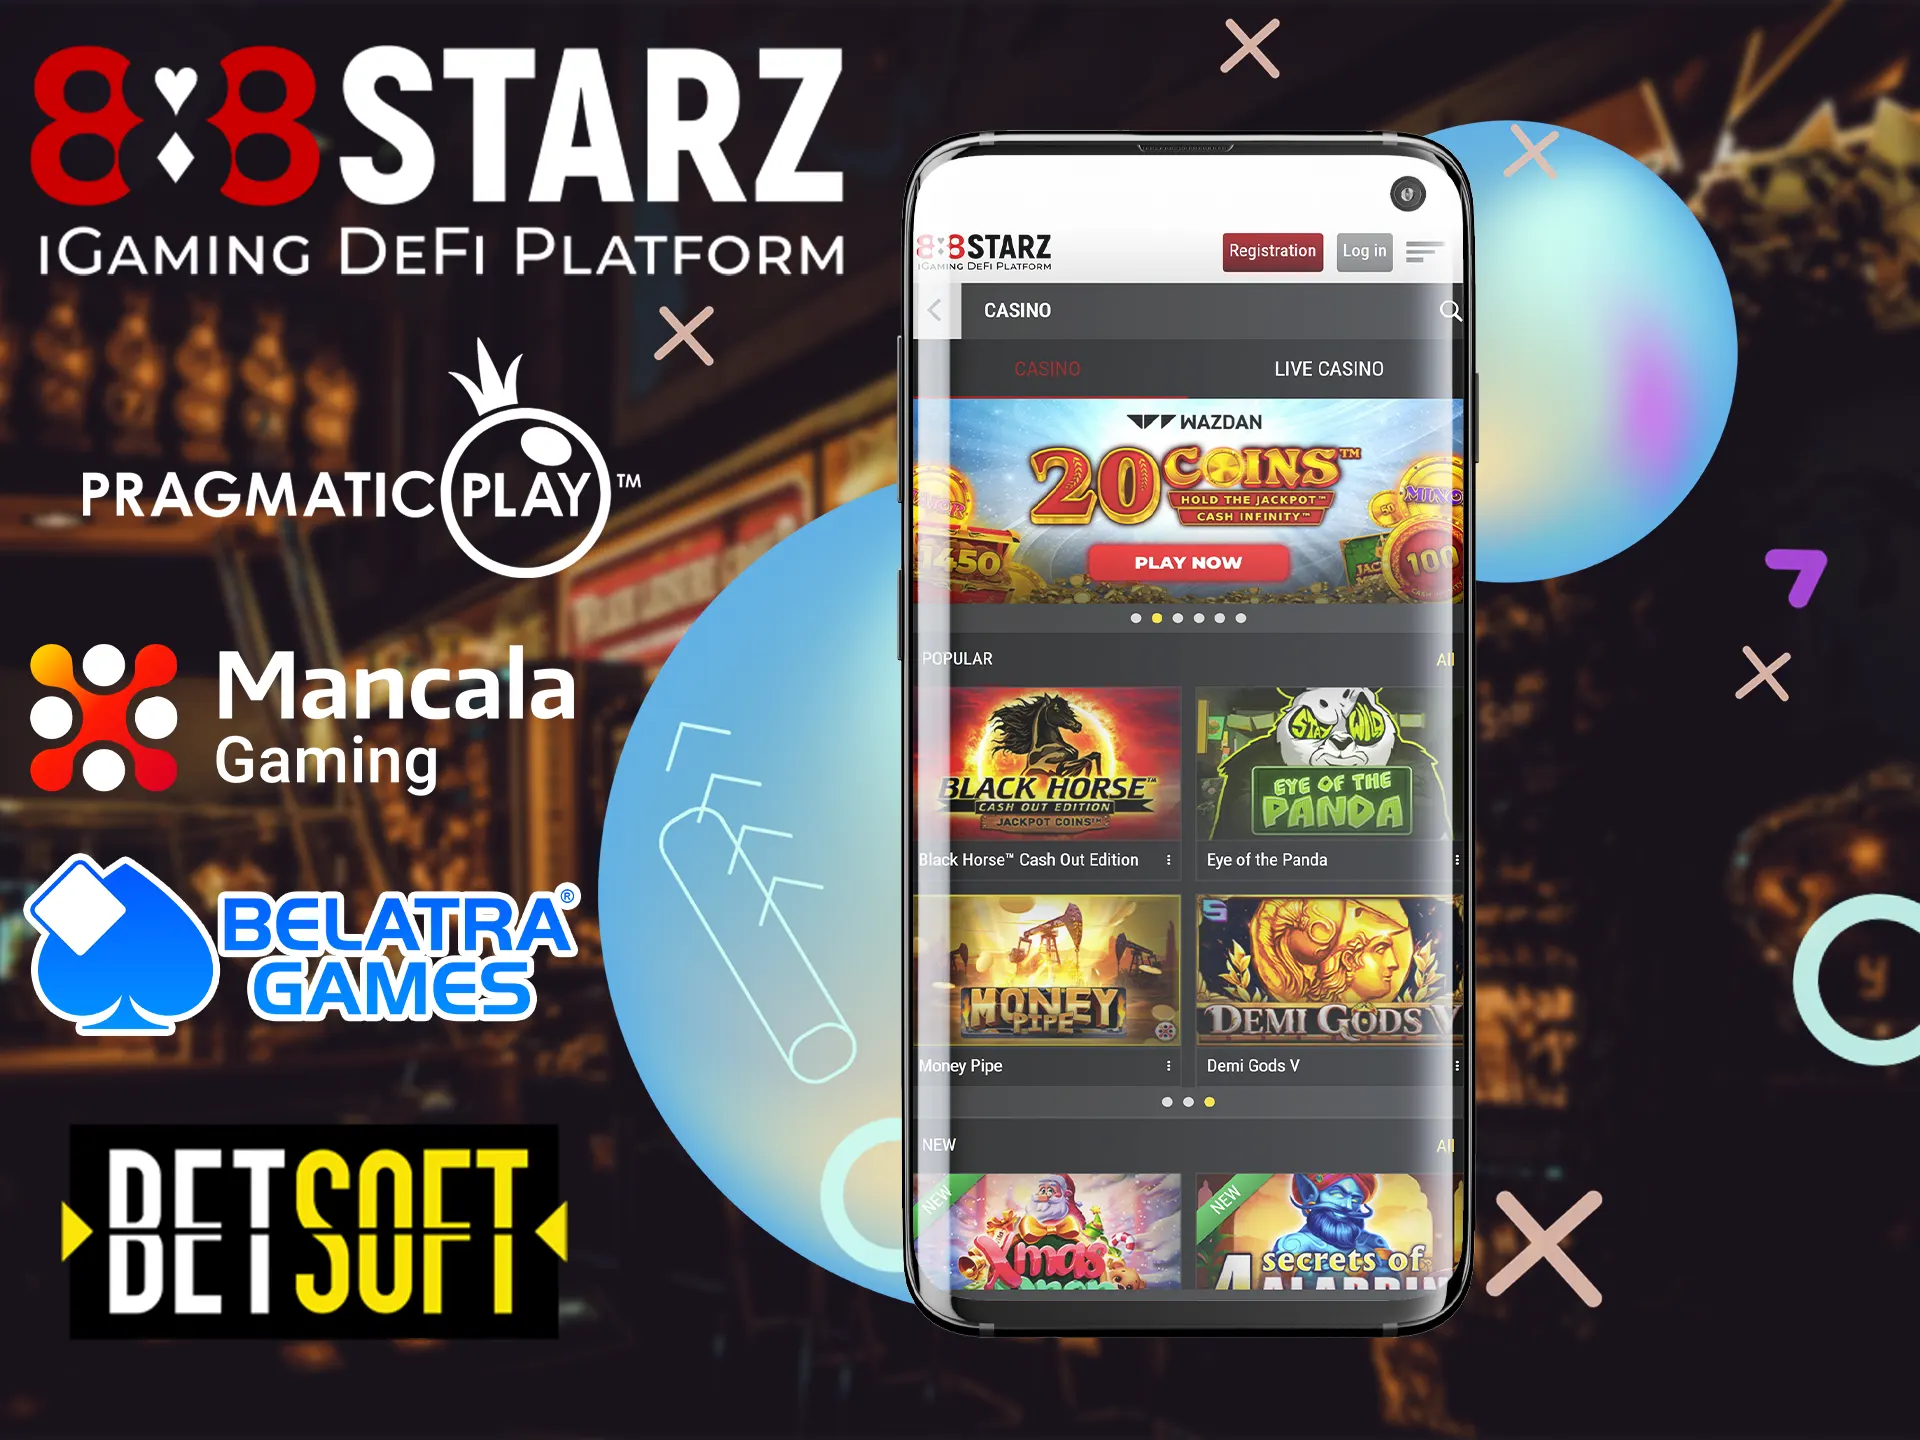 At 888starz сasino, you will only find quality service providers to maximize your gaming experience.